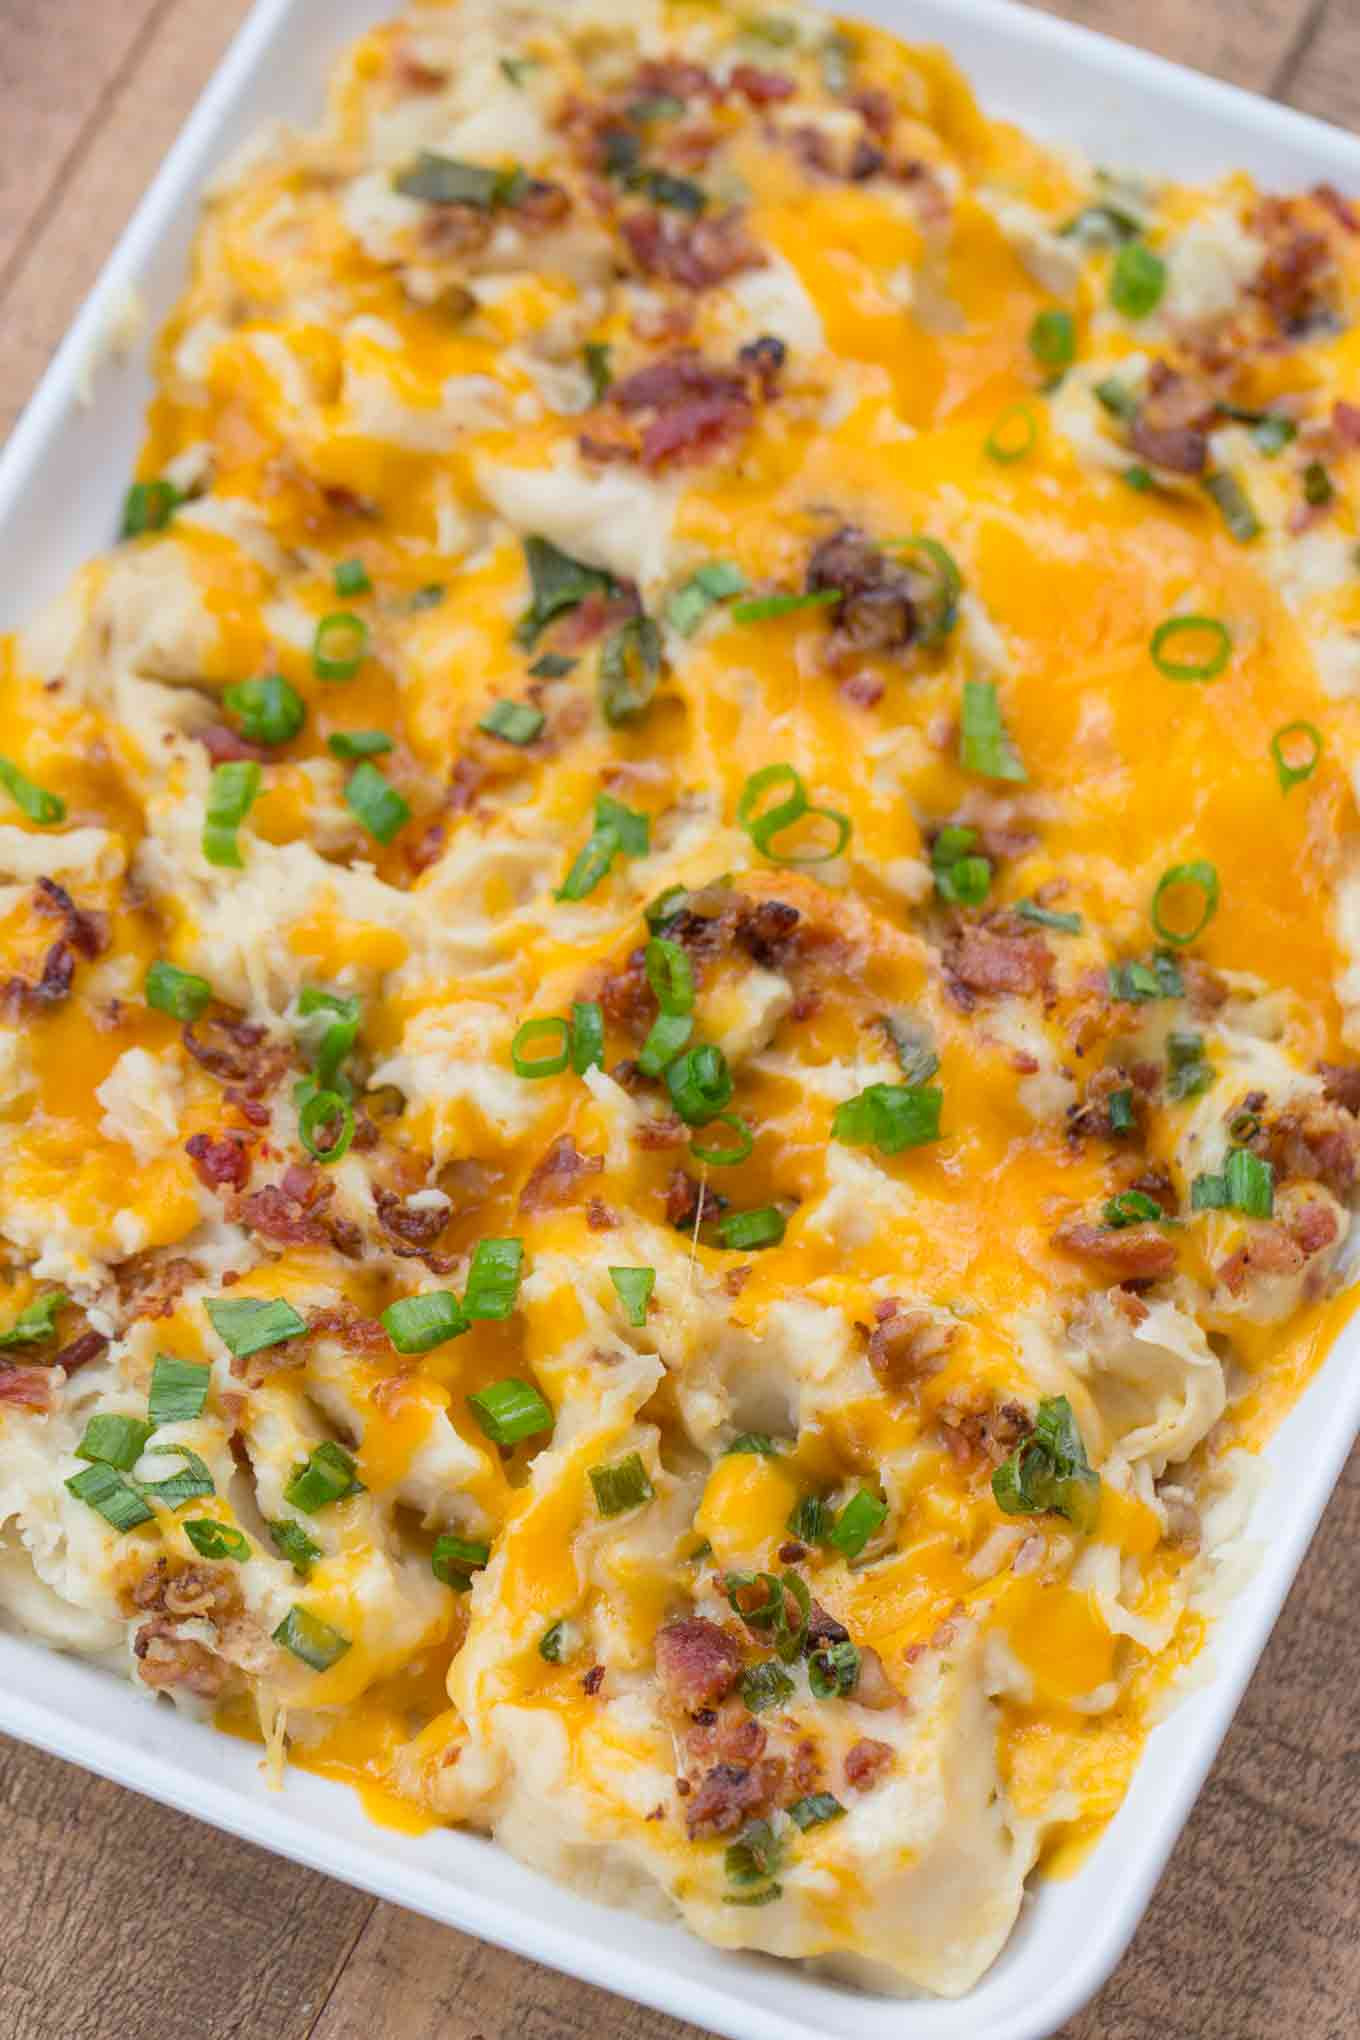 Chili Loaded Mashed Potatoes Recipe
 The Best Ideas for Chili Loaded Mashed Potatoes Recipe